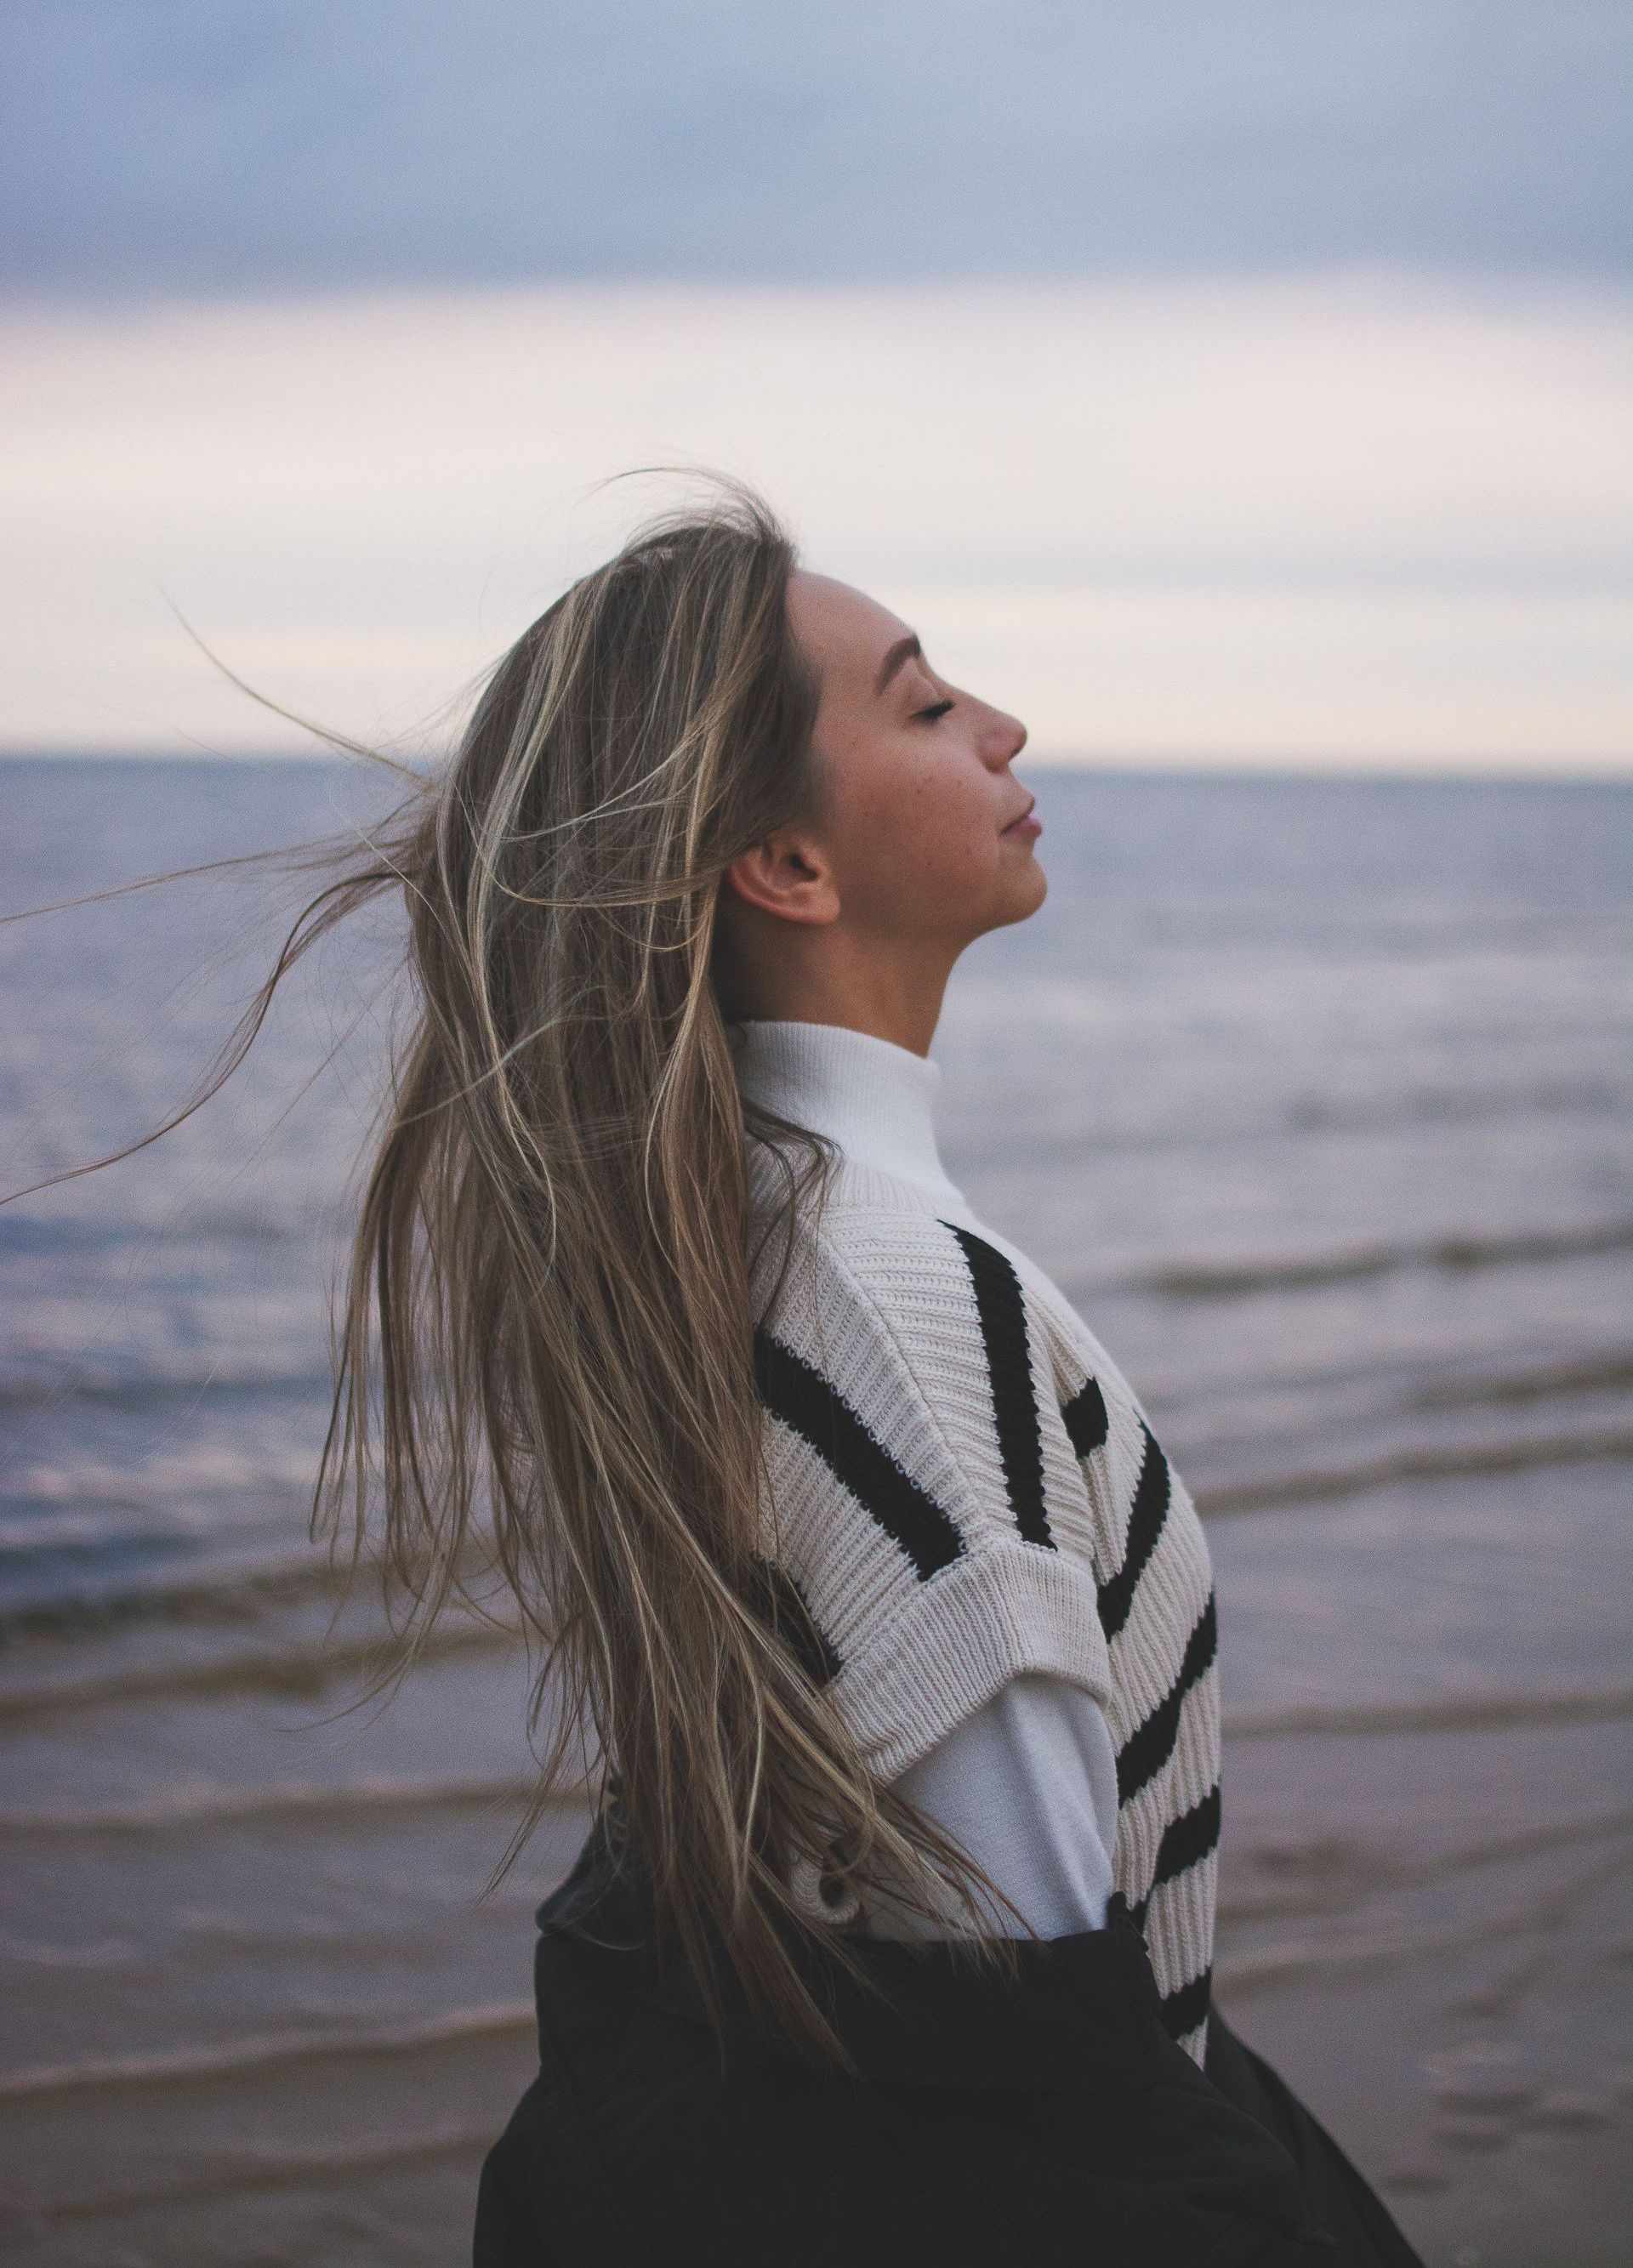 a woman is standing on a beach with her eyes closed and her hair blowing in the wind.